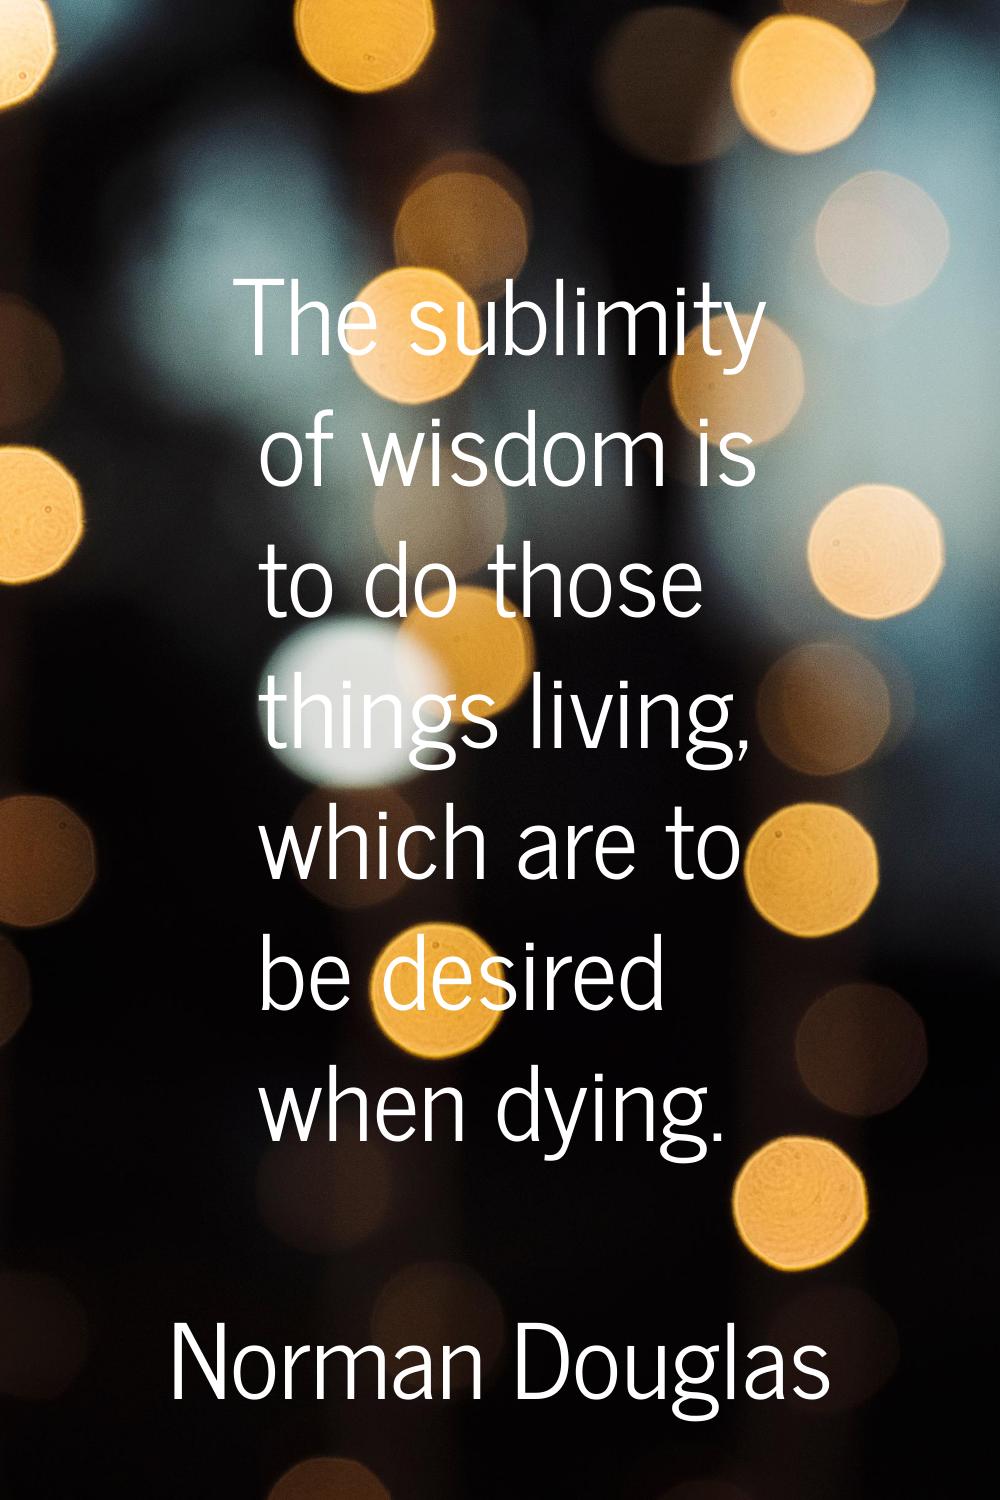 The sublimity of wisdom is to do those things living, which are to be desired when dying.